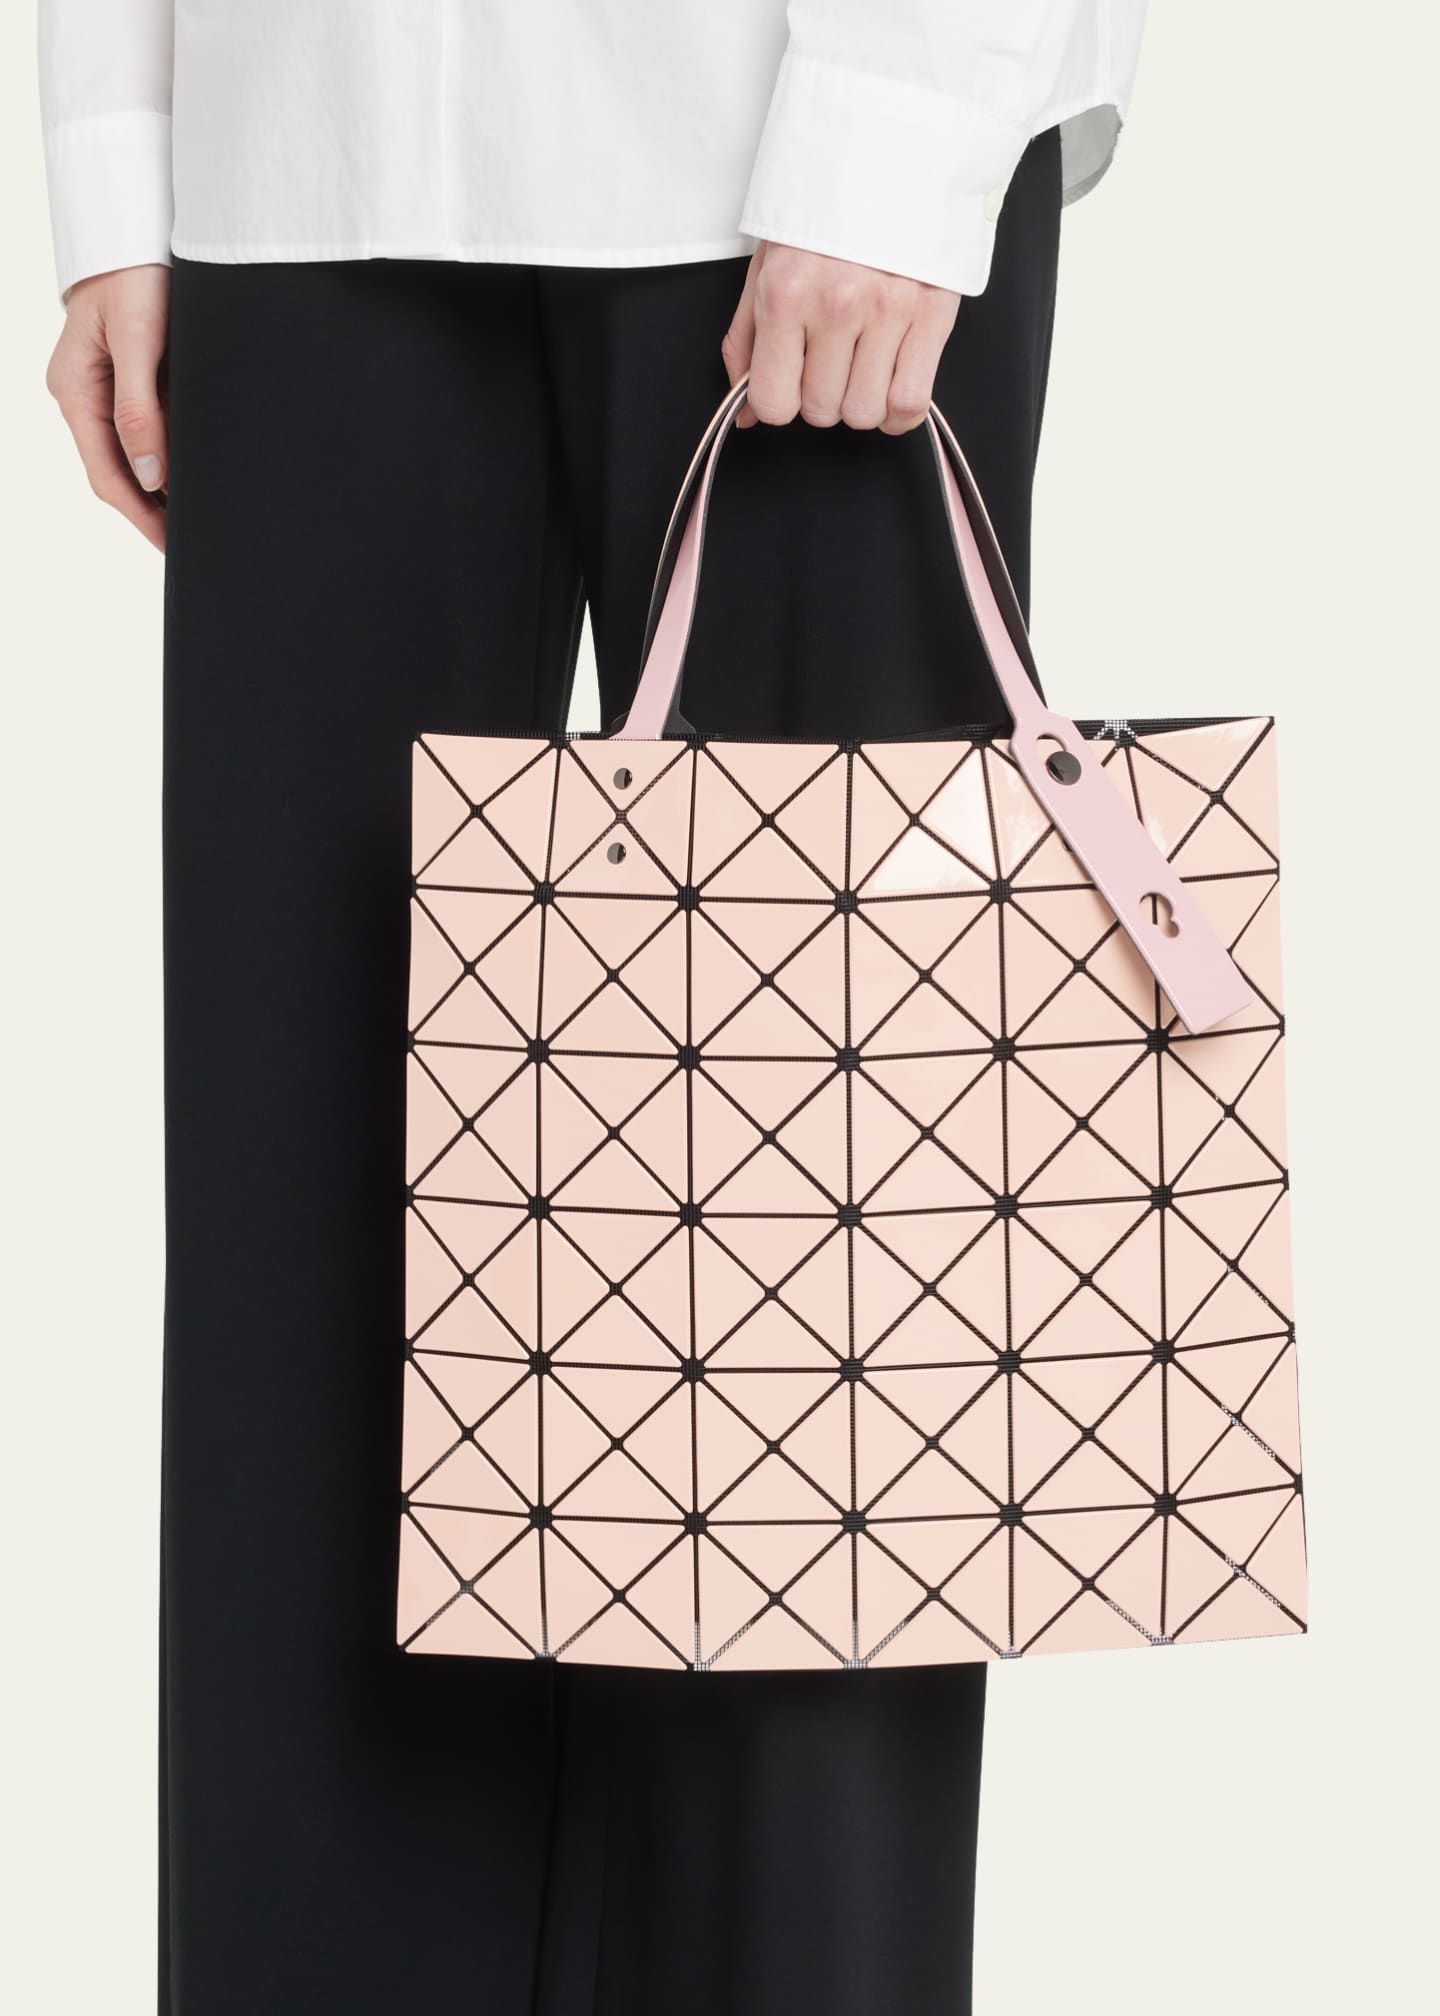 Issey Miyake, Bags, Authentic Bao Bao Lucent Matte Pink